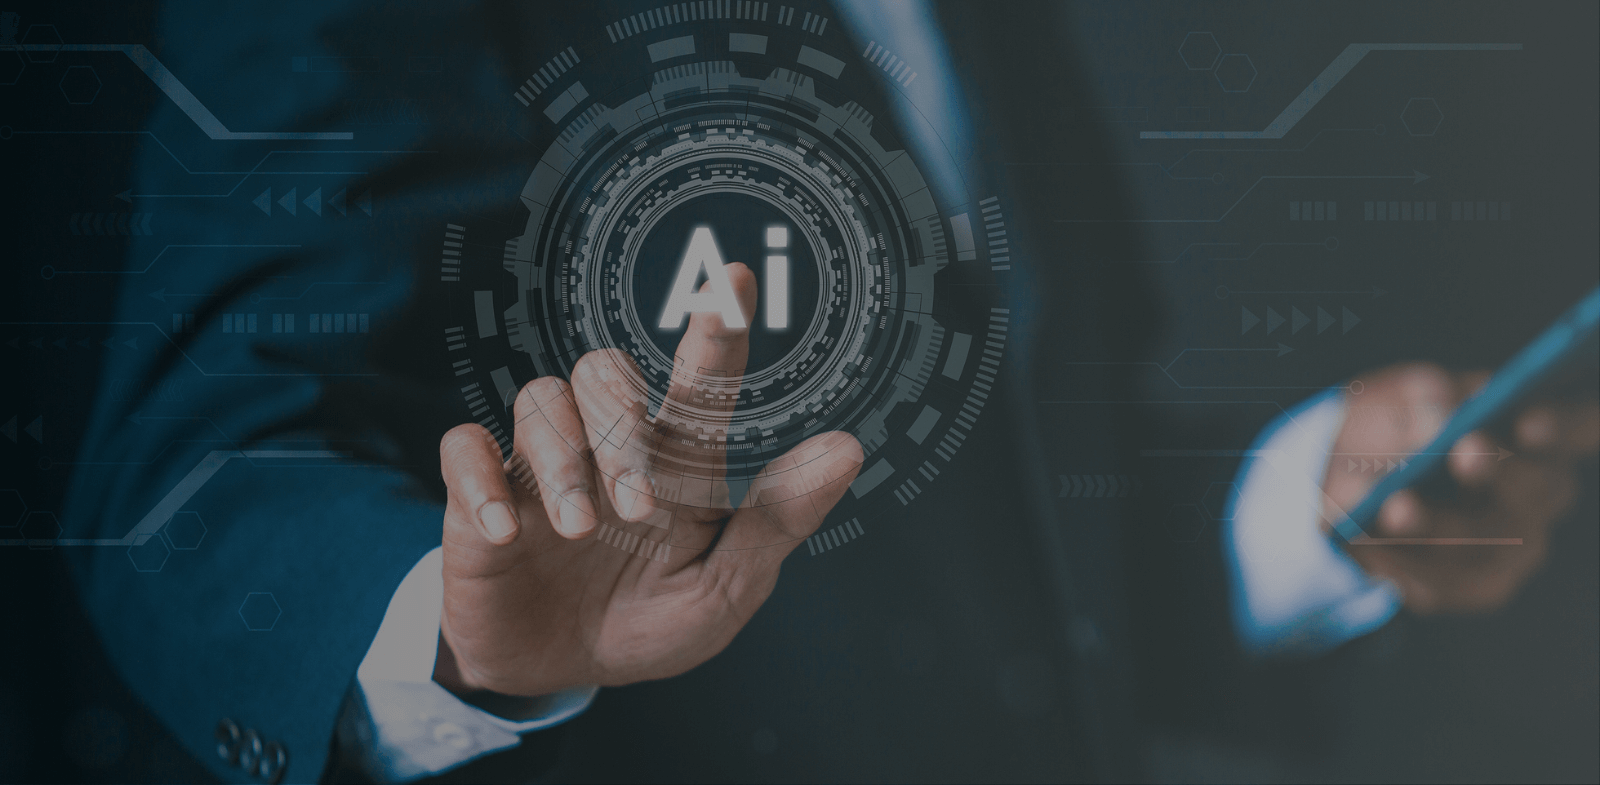 Maximising Potential with the Power of AI